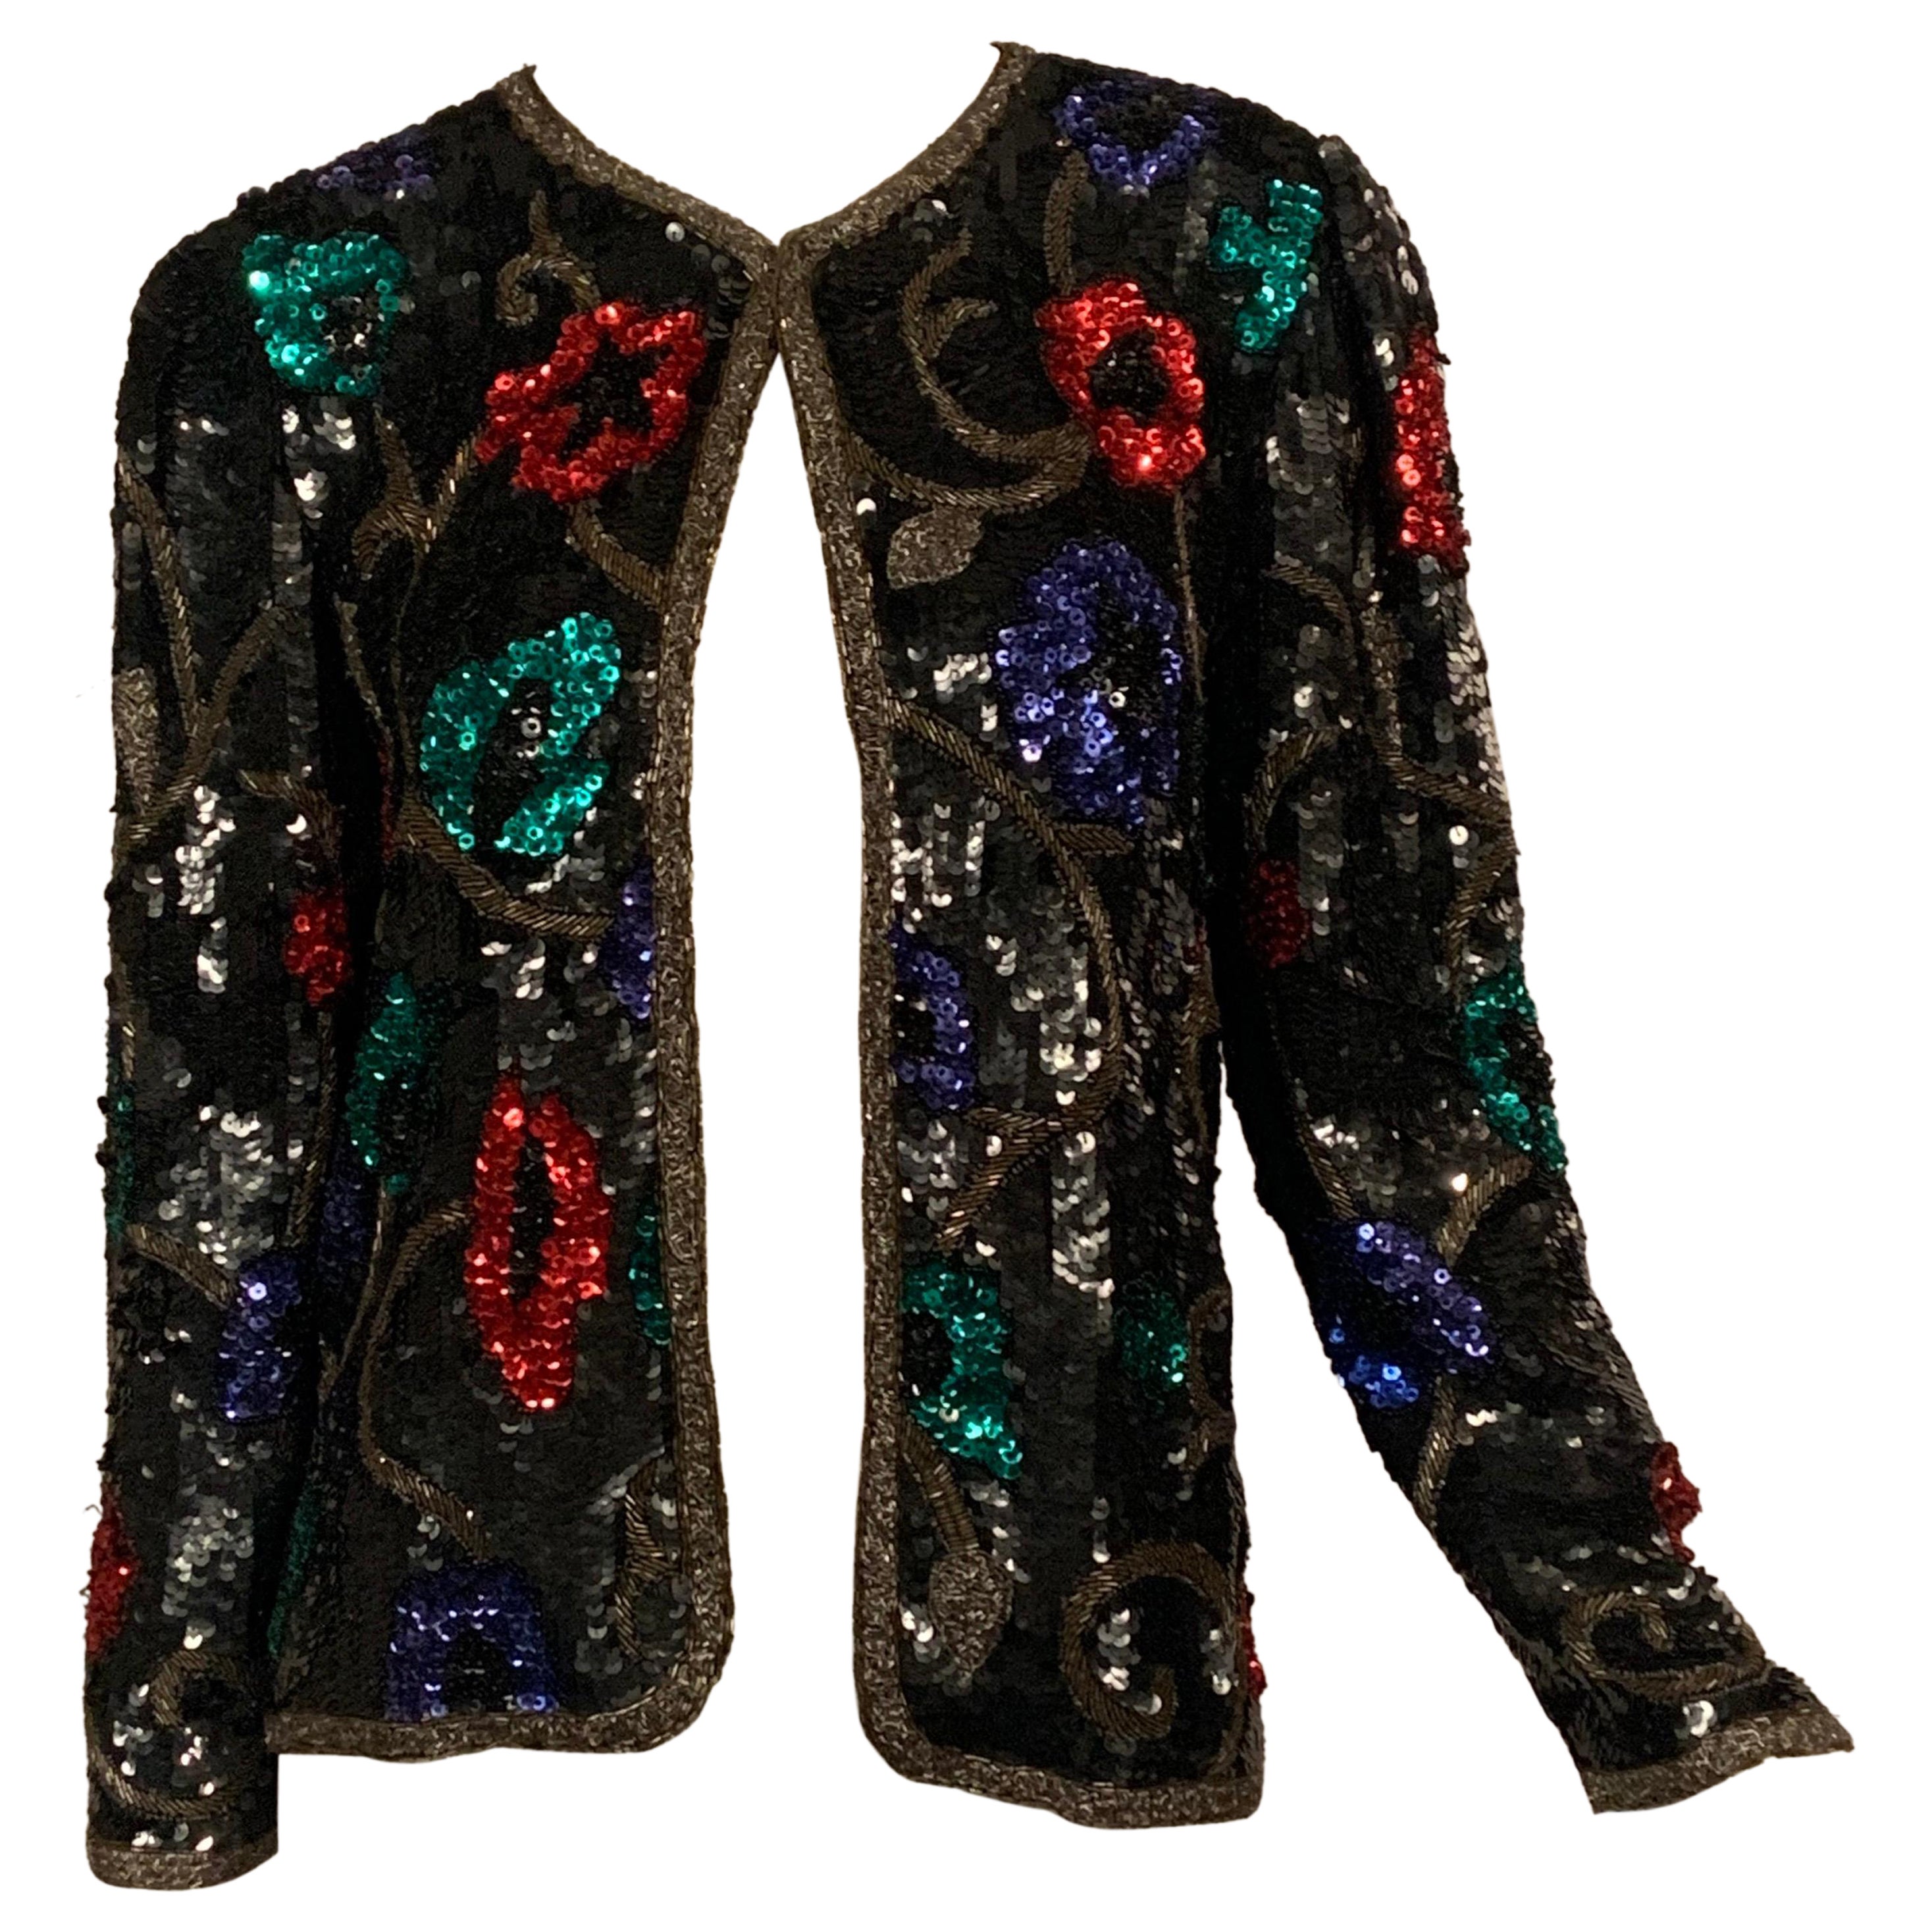 Black Sequin Jacket with Colorful Flower and Vine Decoration For Sale